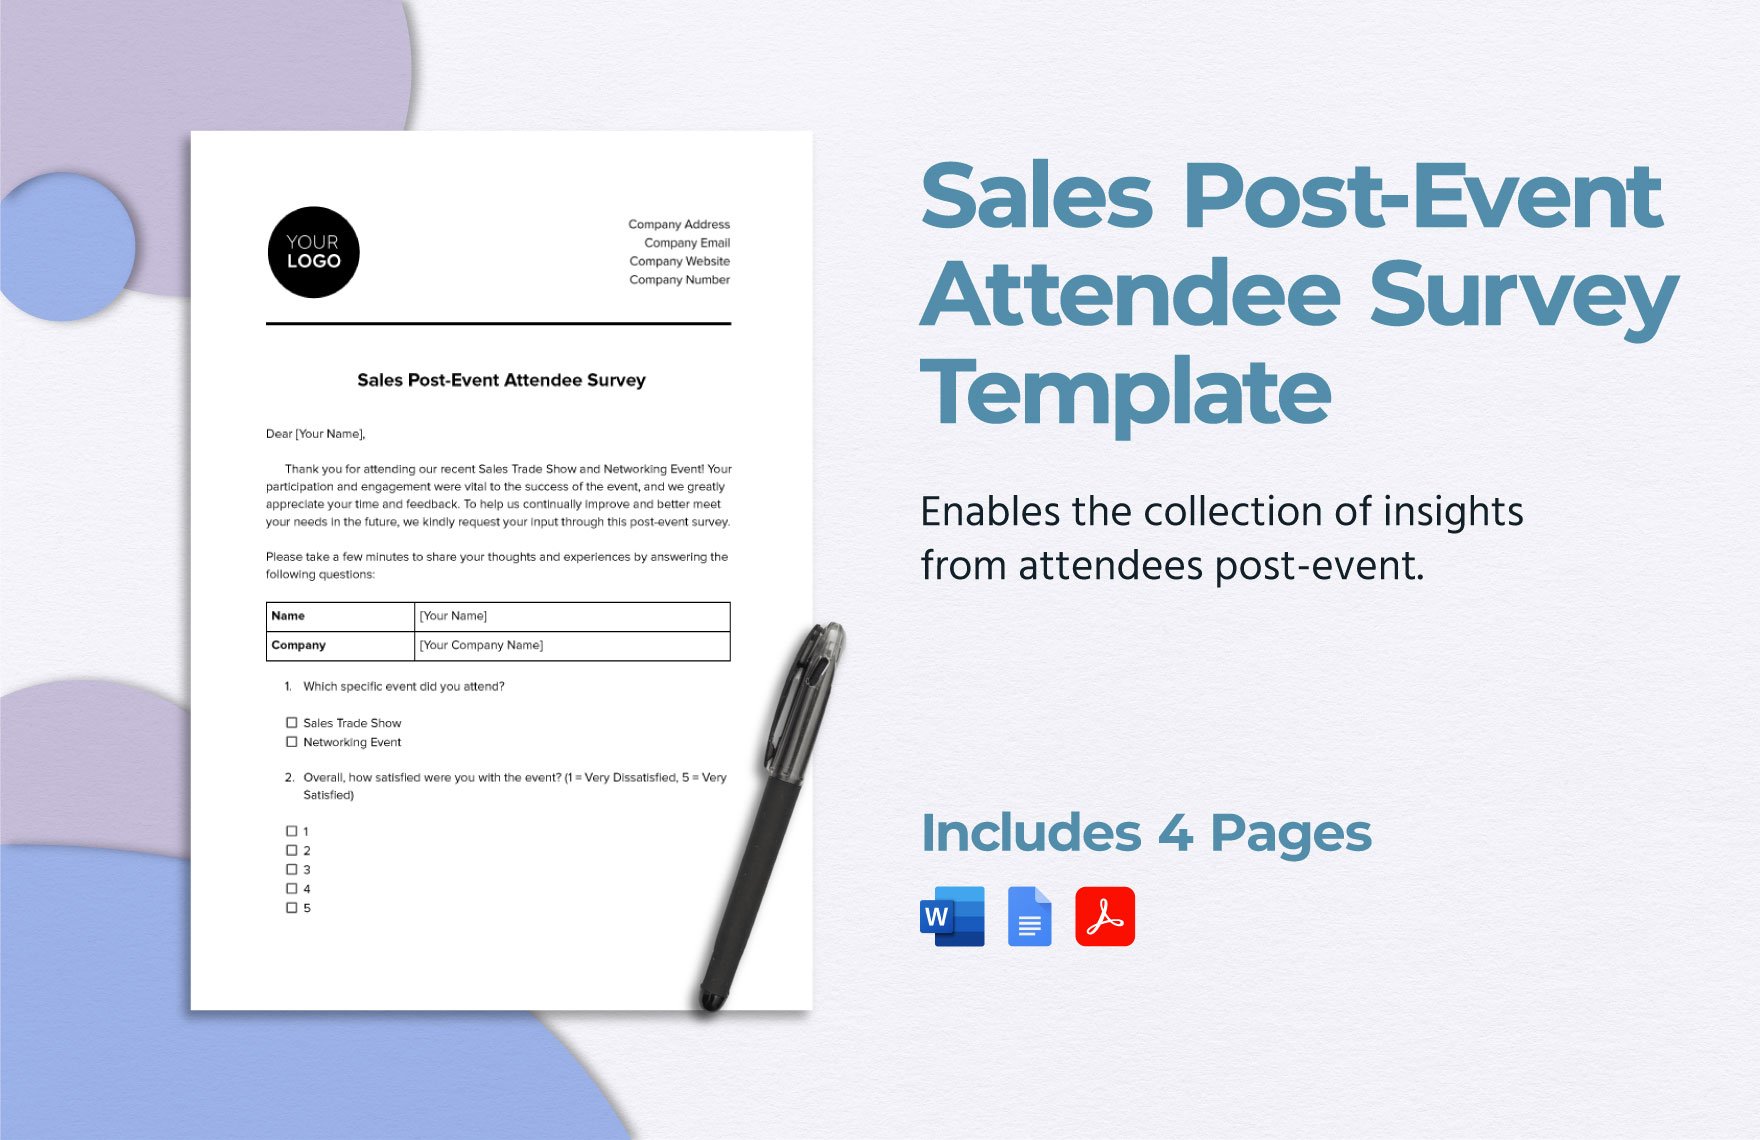 Sales Post-Event Attendee Survey Template